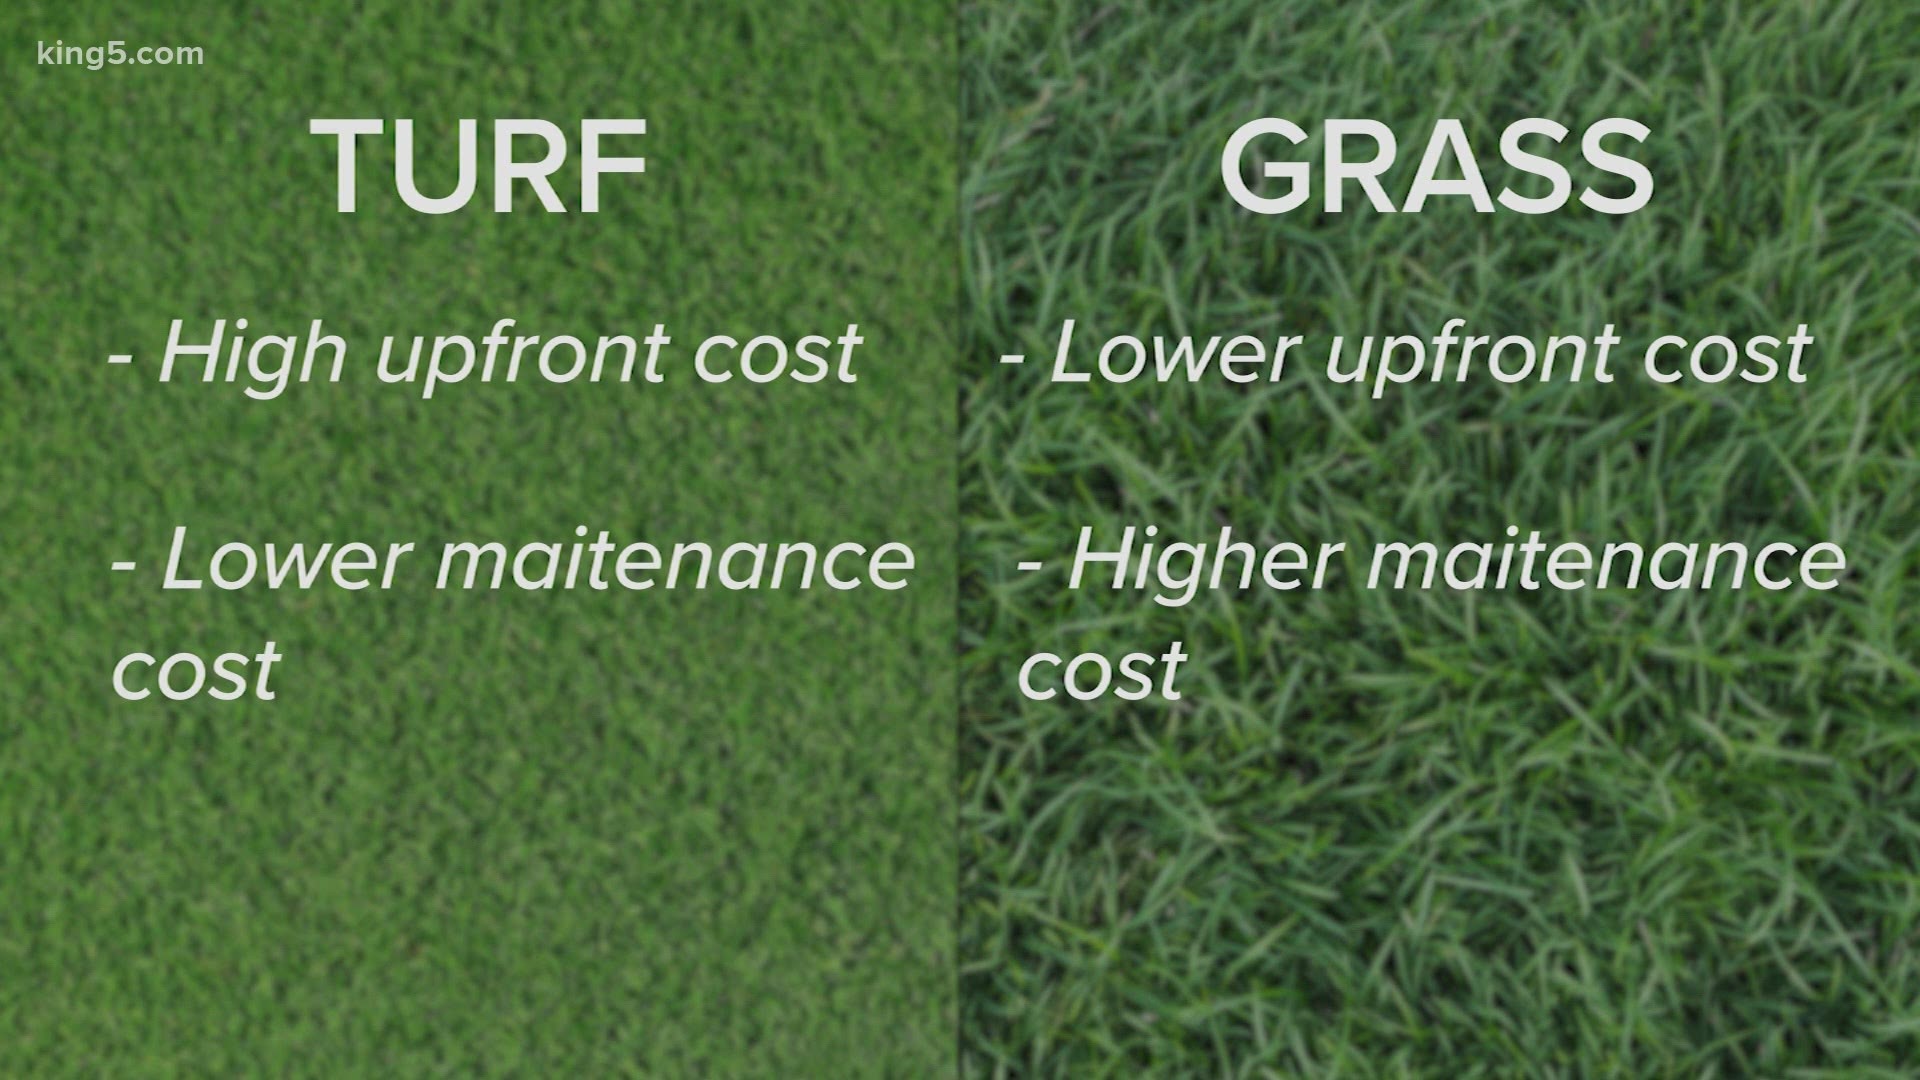 It's not an easy yes or no, as things like money, time and the environment are at play when it comes to choosing between natural grass or artificial turf.